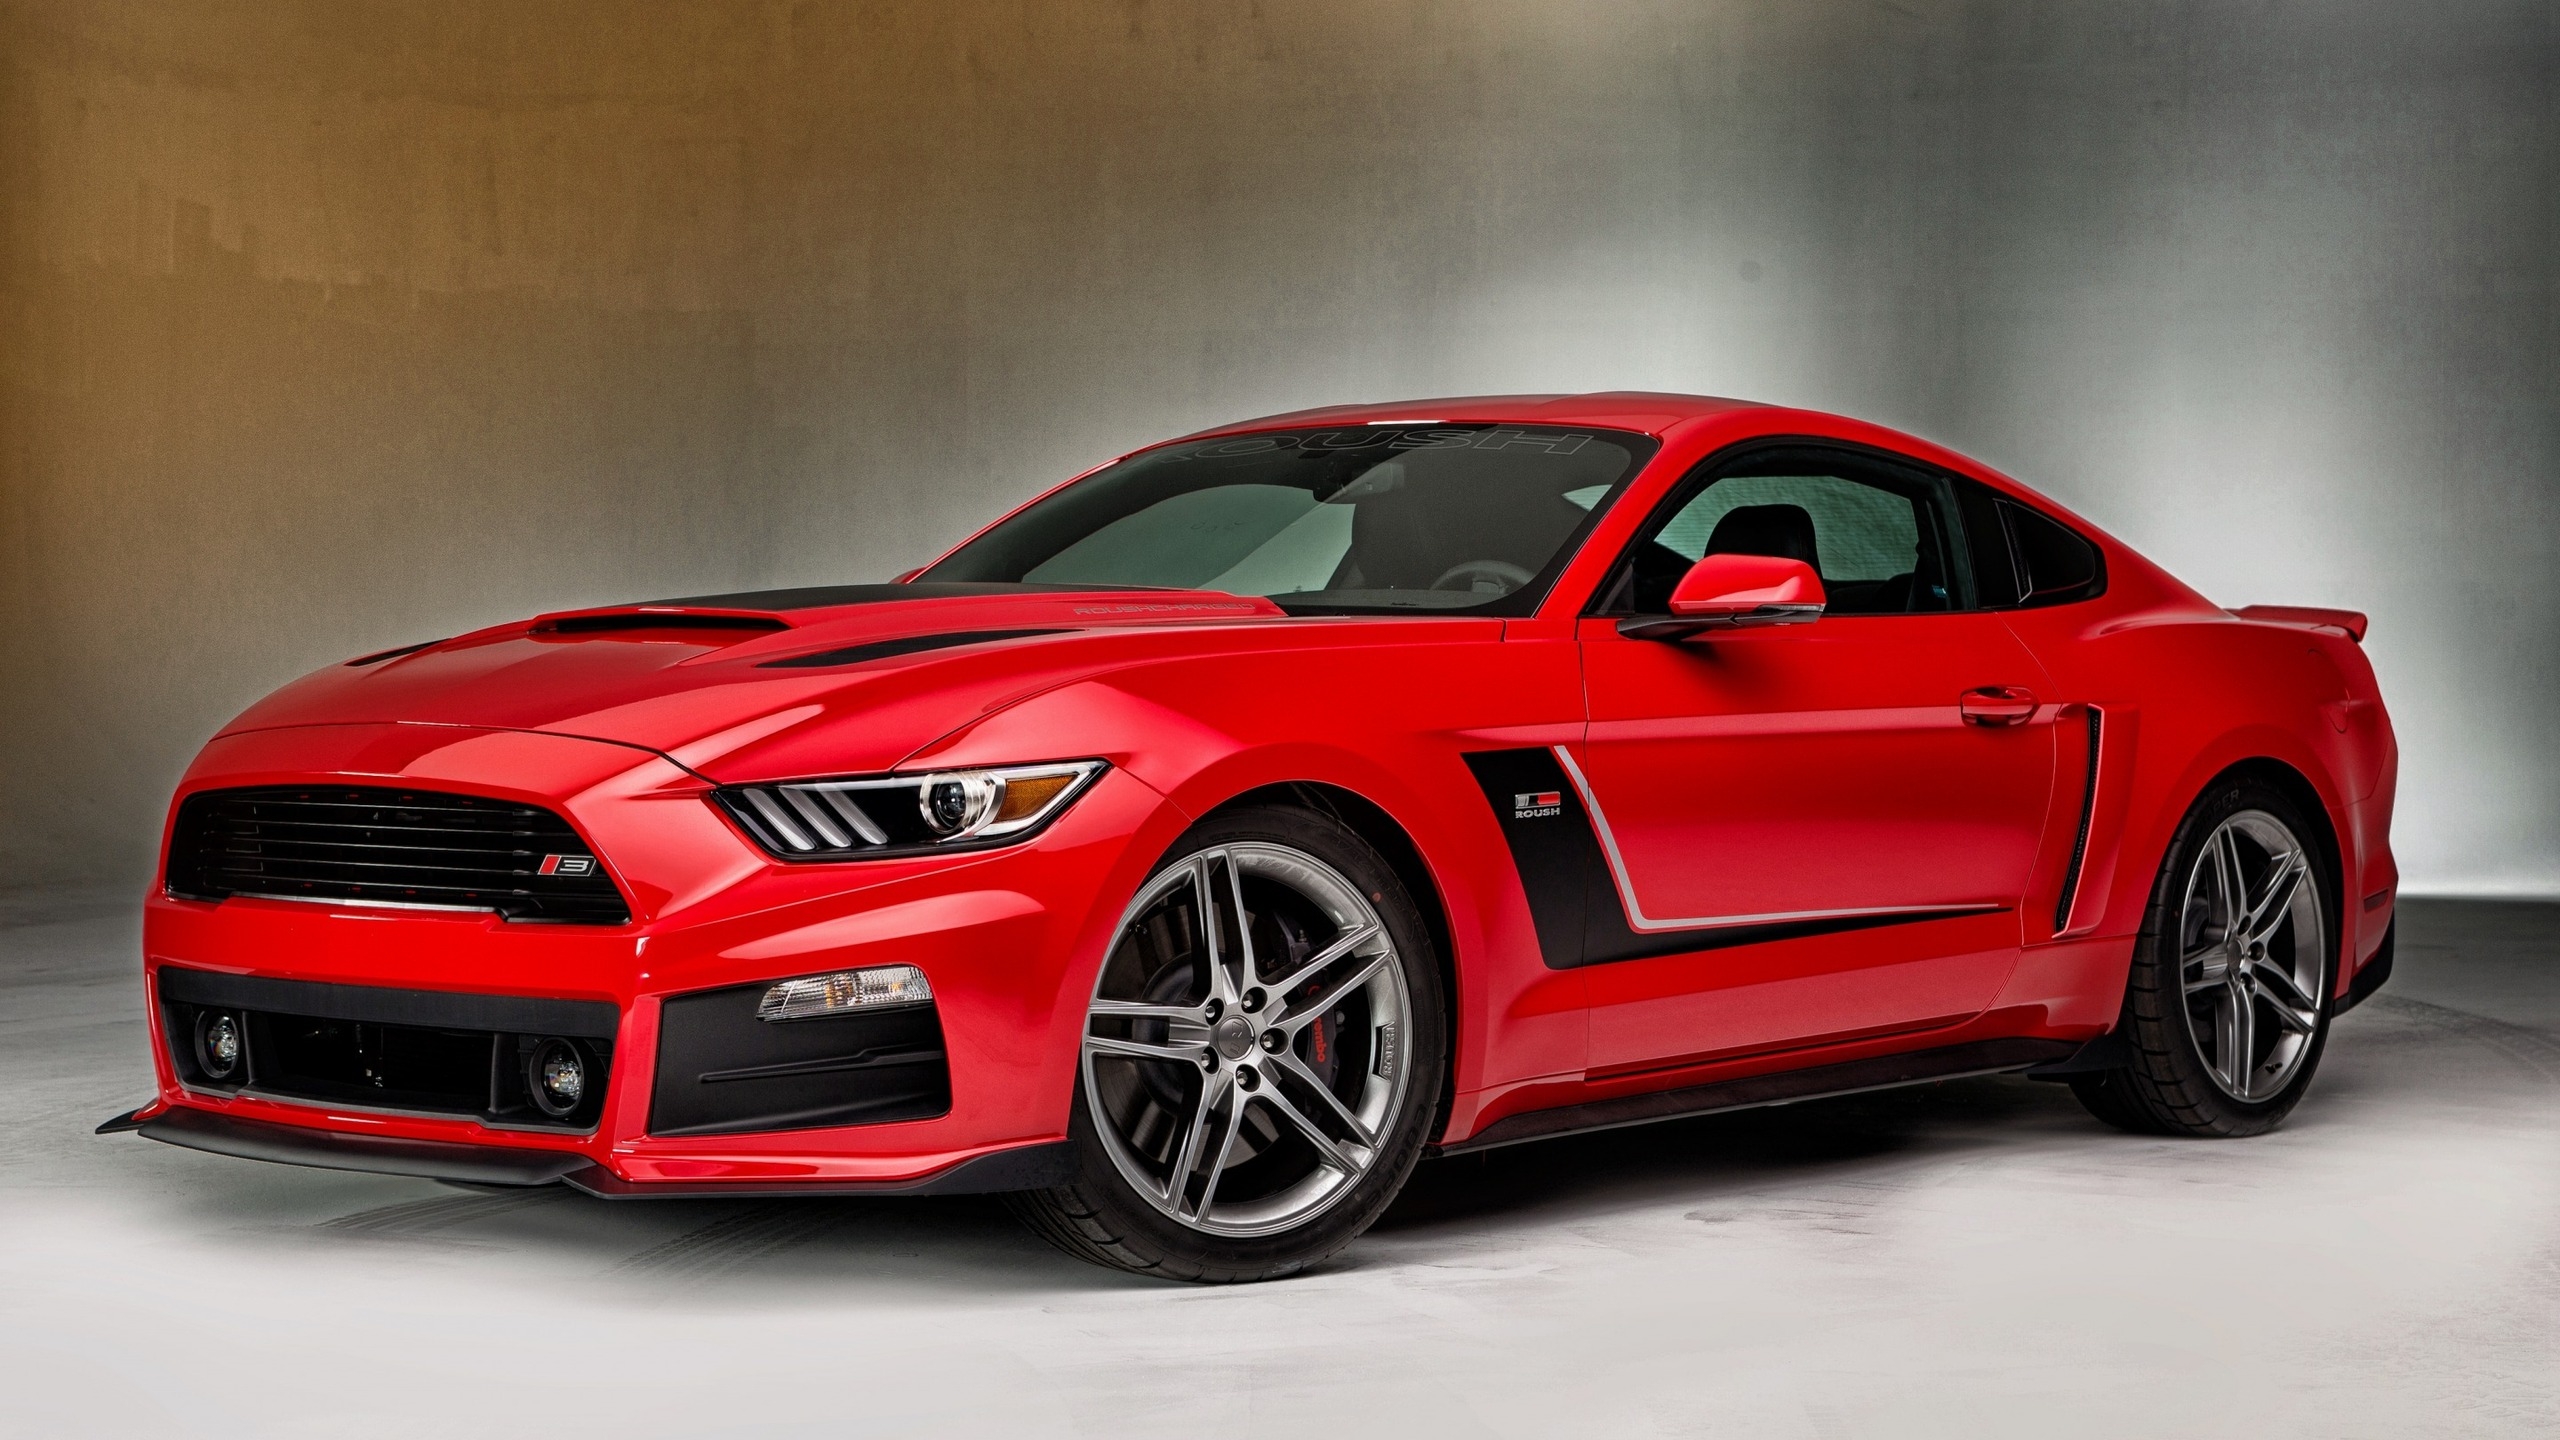 Gourgeous Red Ford Mustang for 2560x1440 HDTV resolution